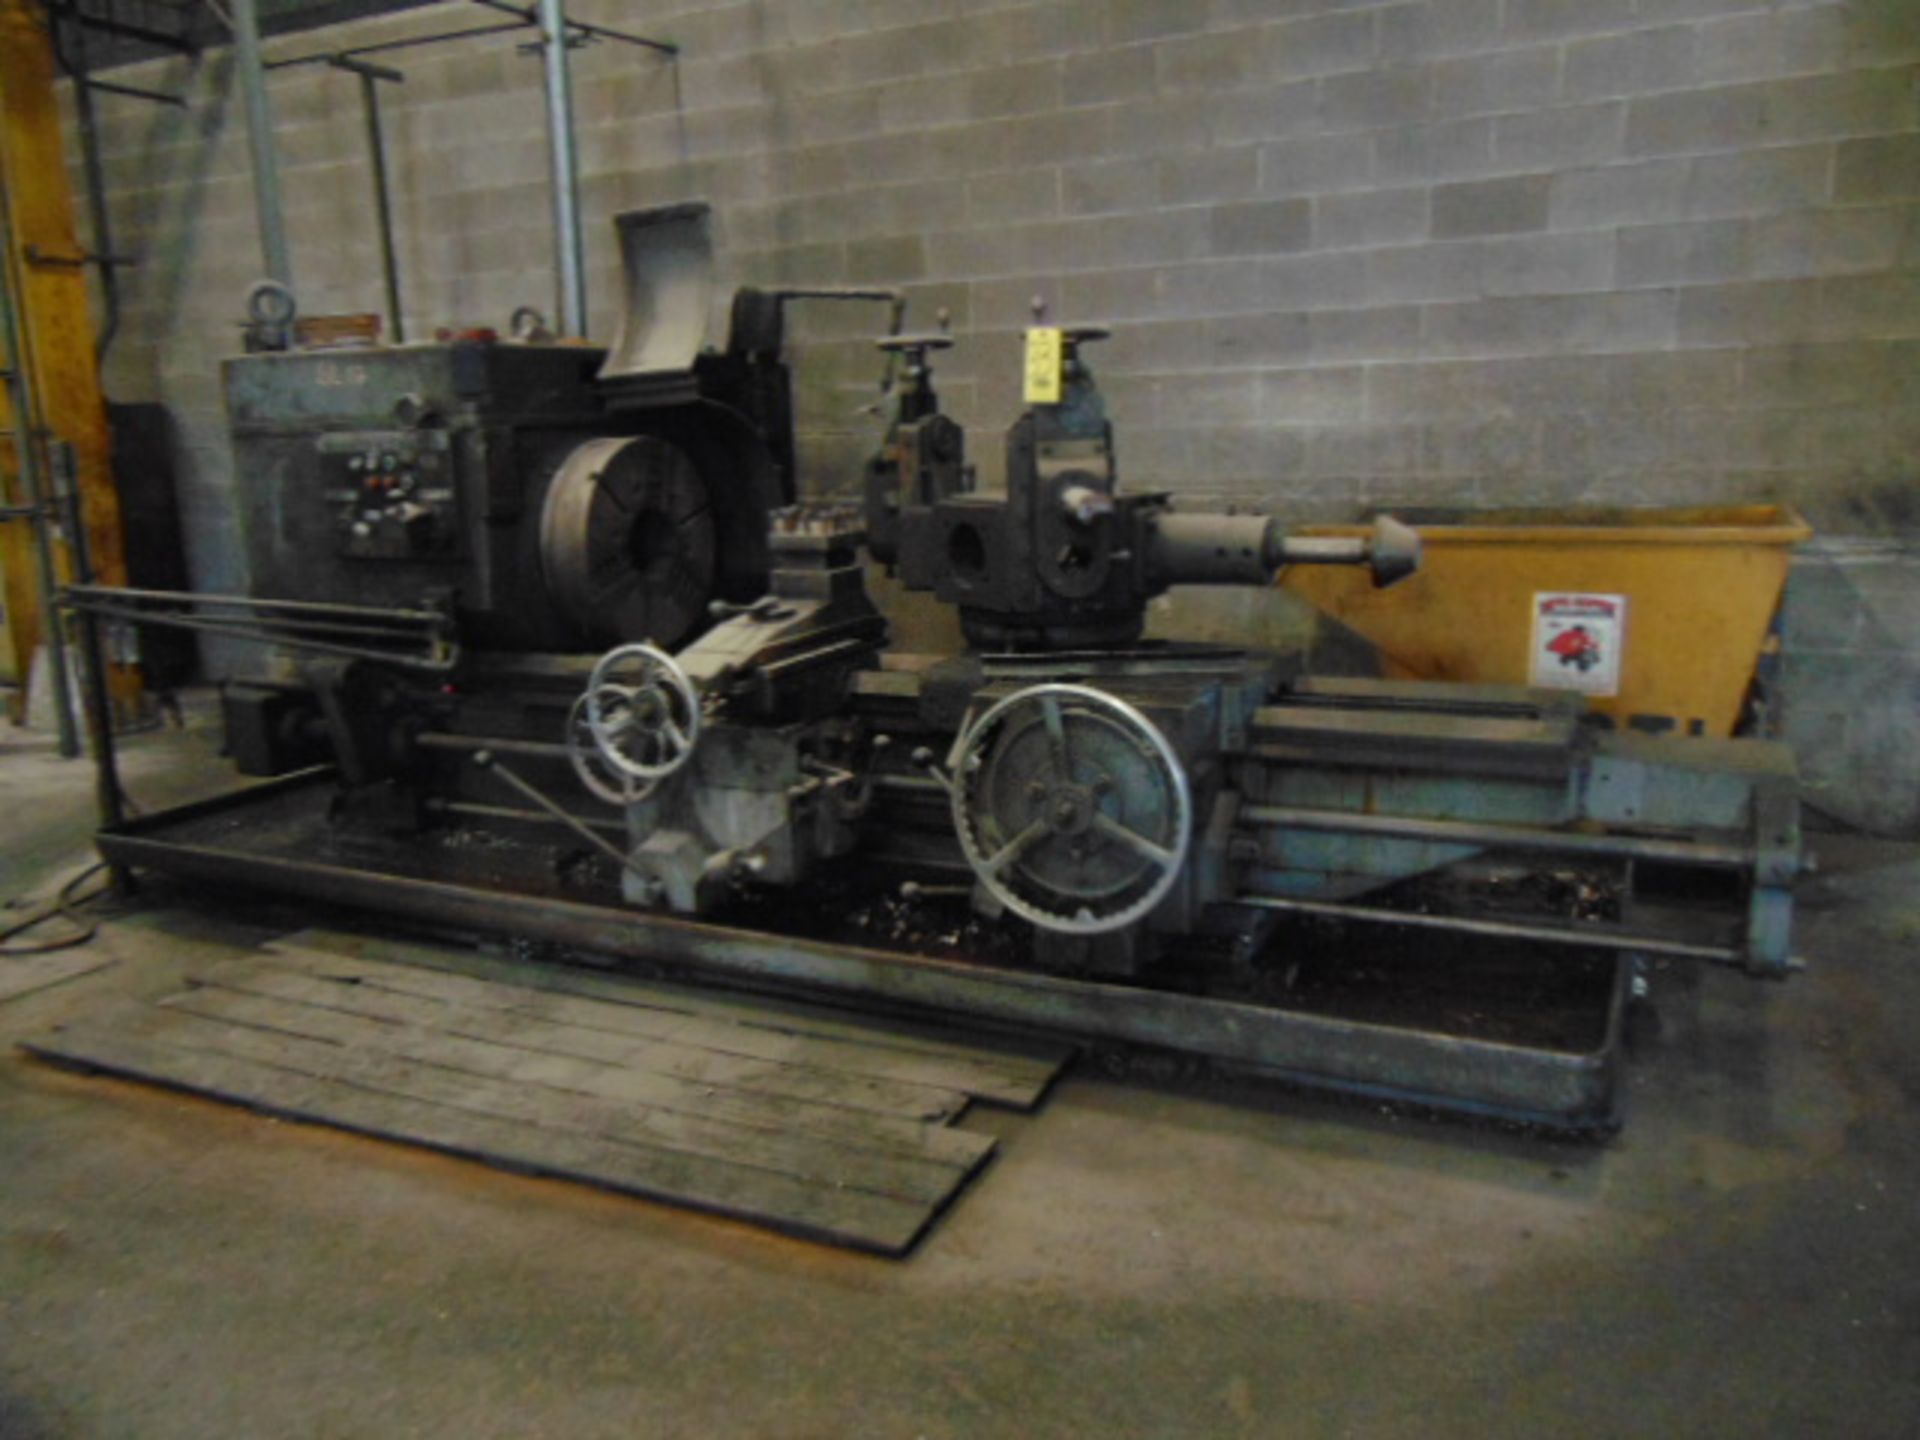 TURRET LATHE, WARNER & SWASEY 4A MDL. M-3550, 9.5" bore, 24" 3-jaw chuck, S/N 1546007 (Loading